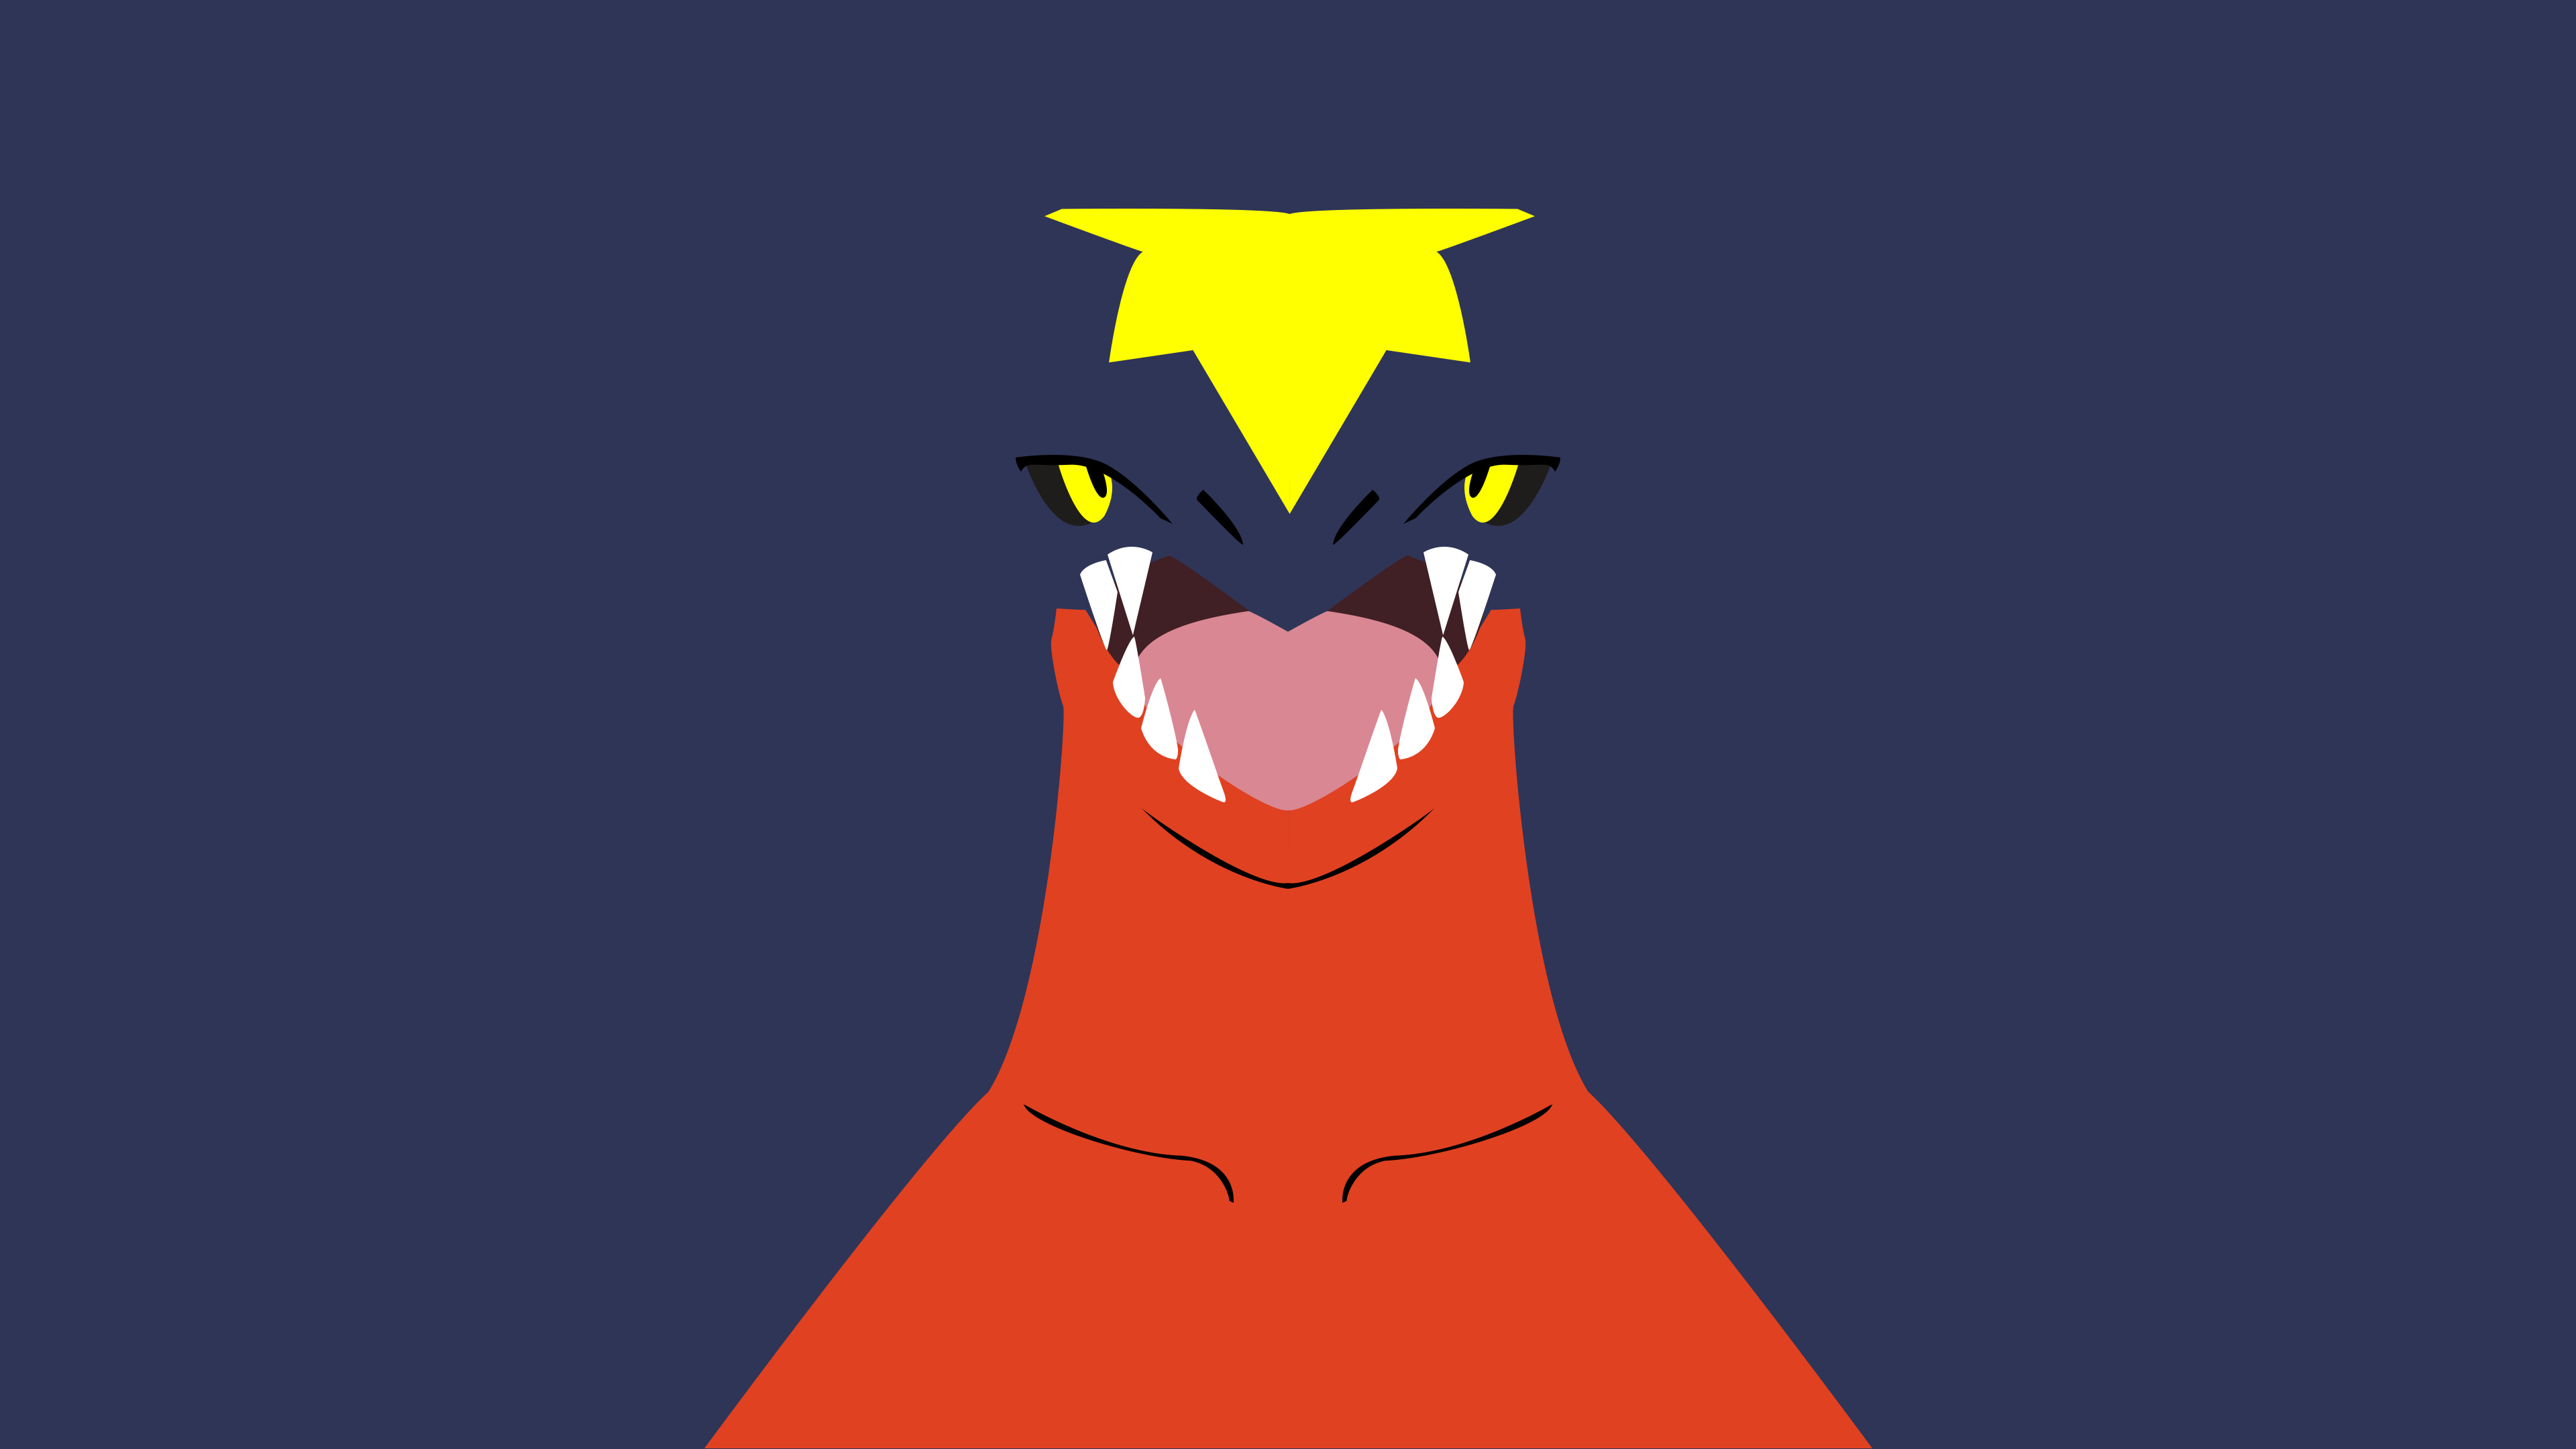 Garchomp wallpaper HD, Gaming character, Mythical creature, Power unleashed, 3840x2160 4K Desktop